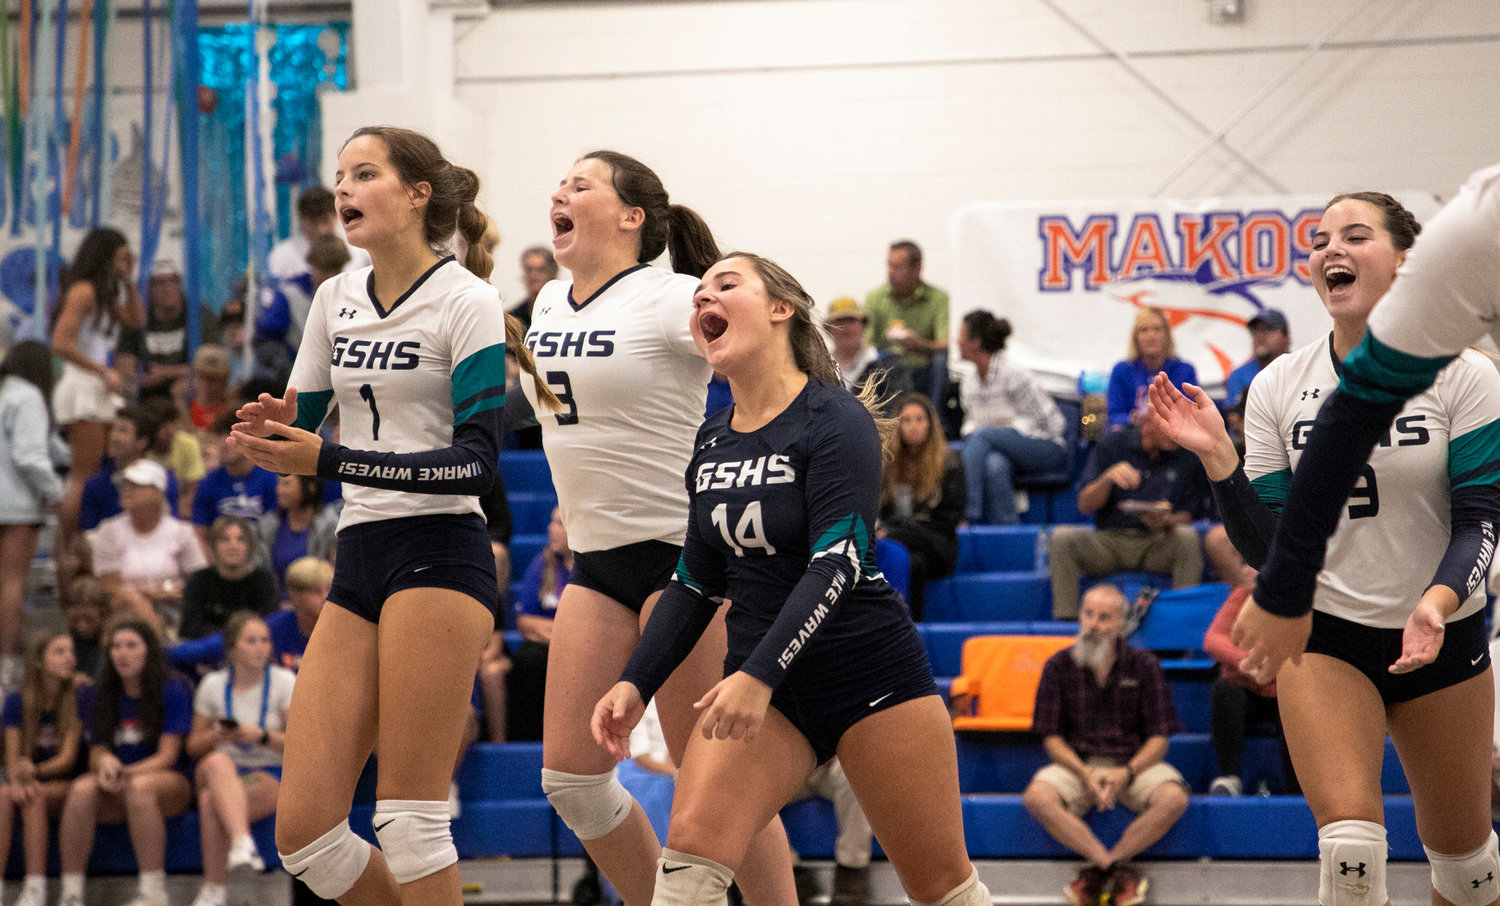 The Gulf Shores Dolphins celebrate while coming off the court for a timeout during their tri-match against Curry at Orange Beach High School Aug. 25. Gulf Shores claimed the Class 5A Area 1 tournament at home Wednesday night and take a No. 1 seed into the super regional bracket.